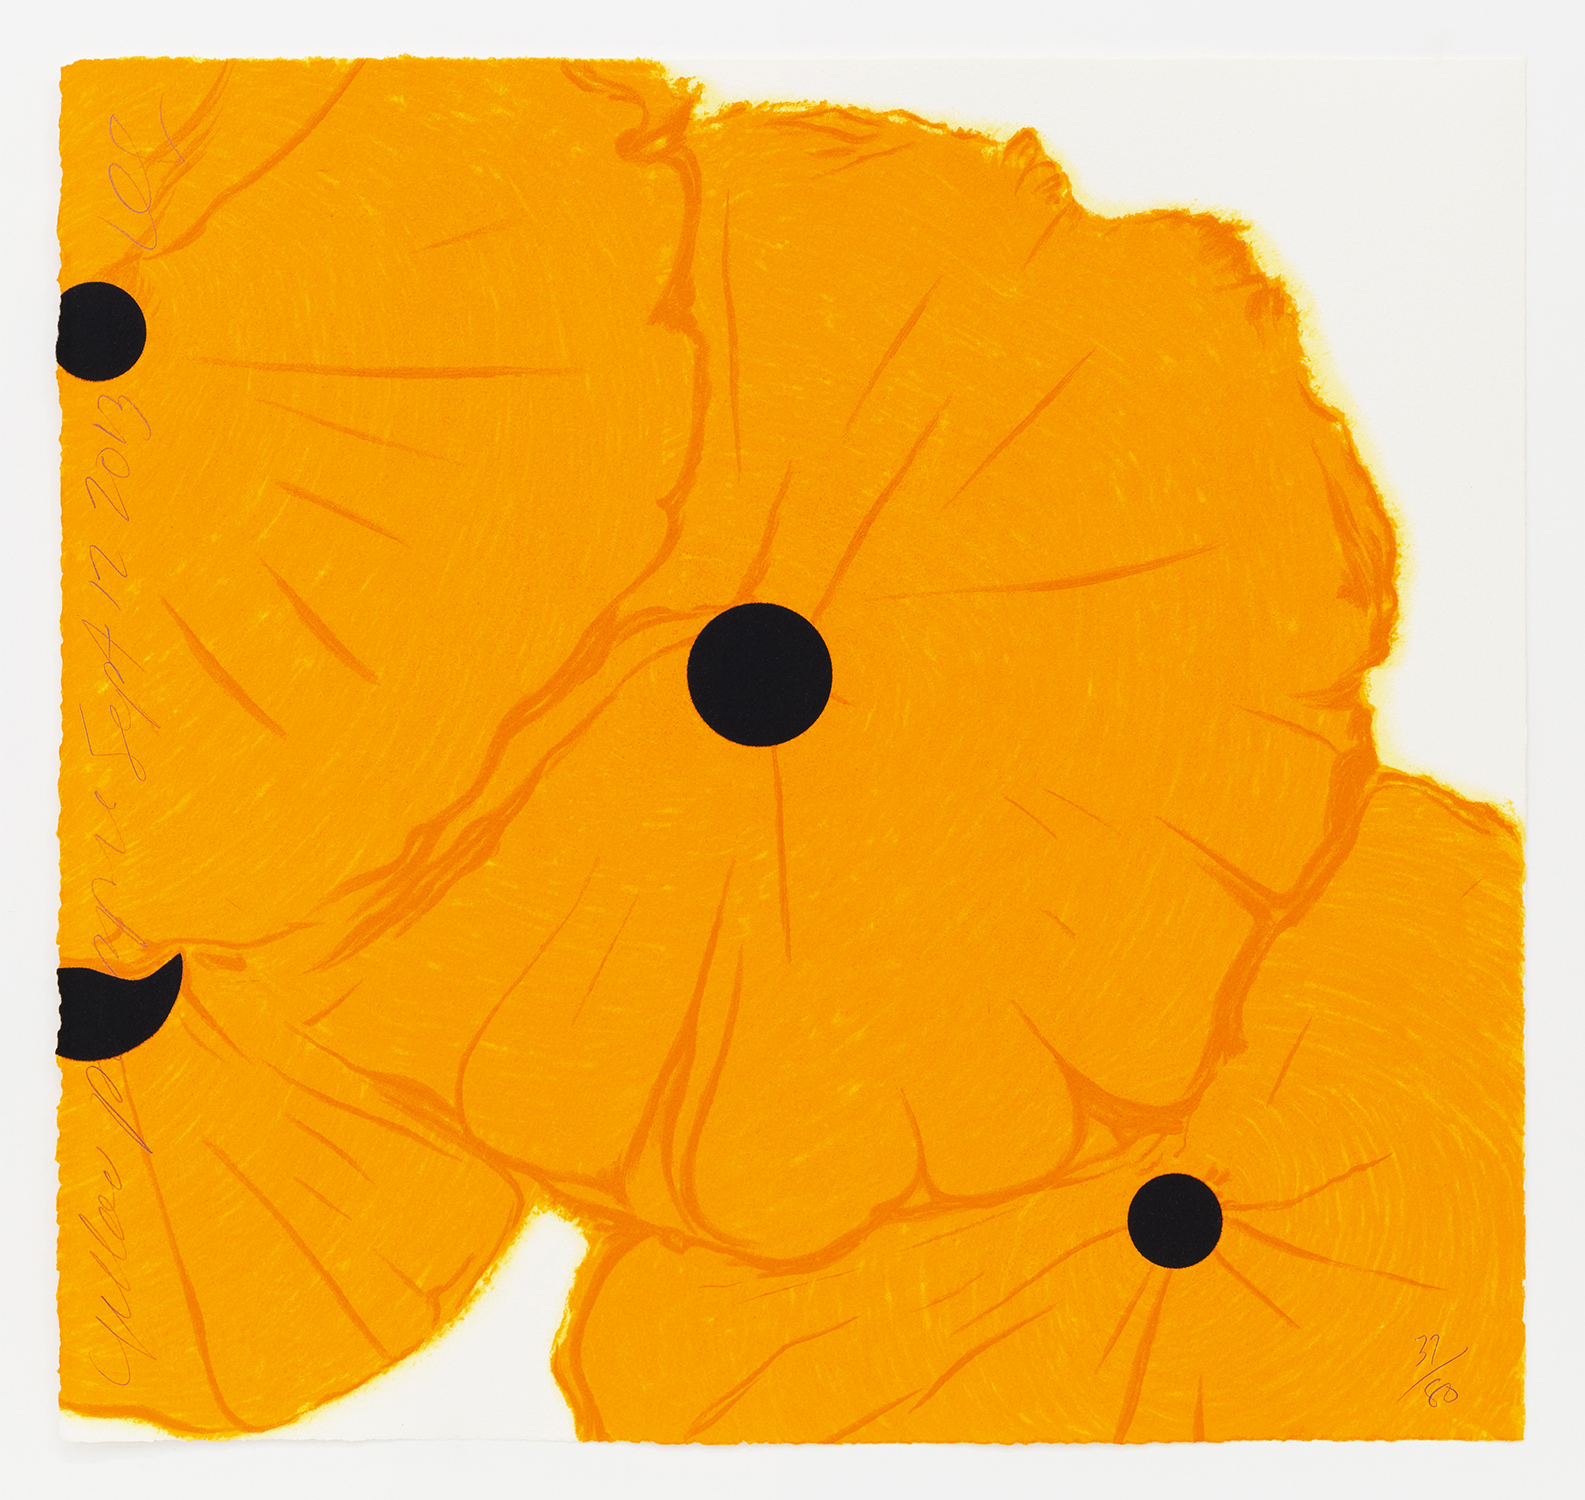 Yellow Poppies, September 12, 2013, 2013, Silkscreen in 8 colors and flocking, 19 x 20 inches (48.3 x 50.8 cm), Edition of 80